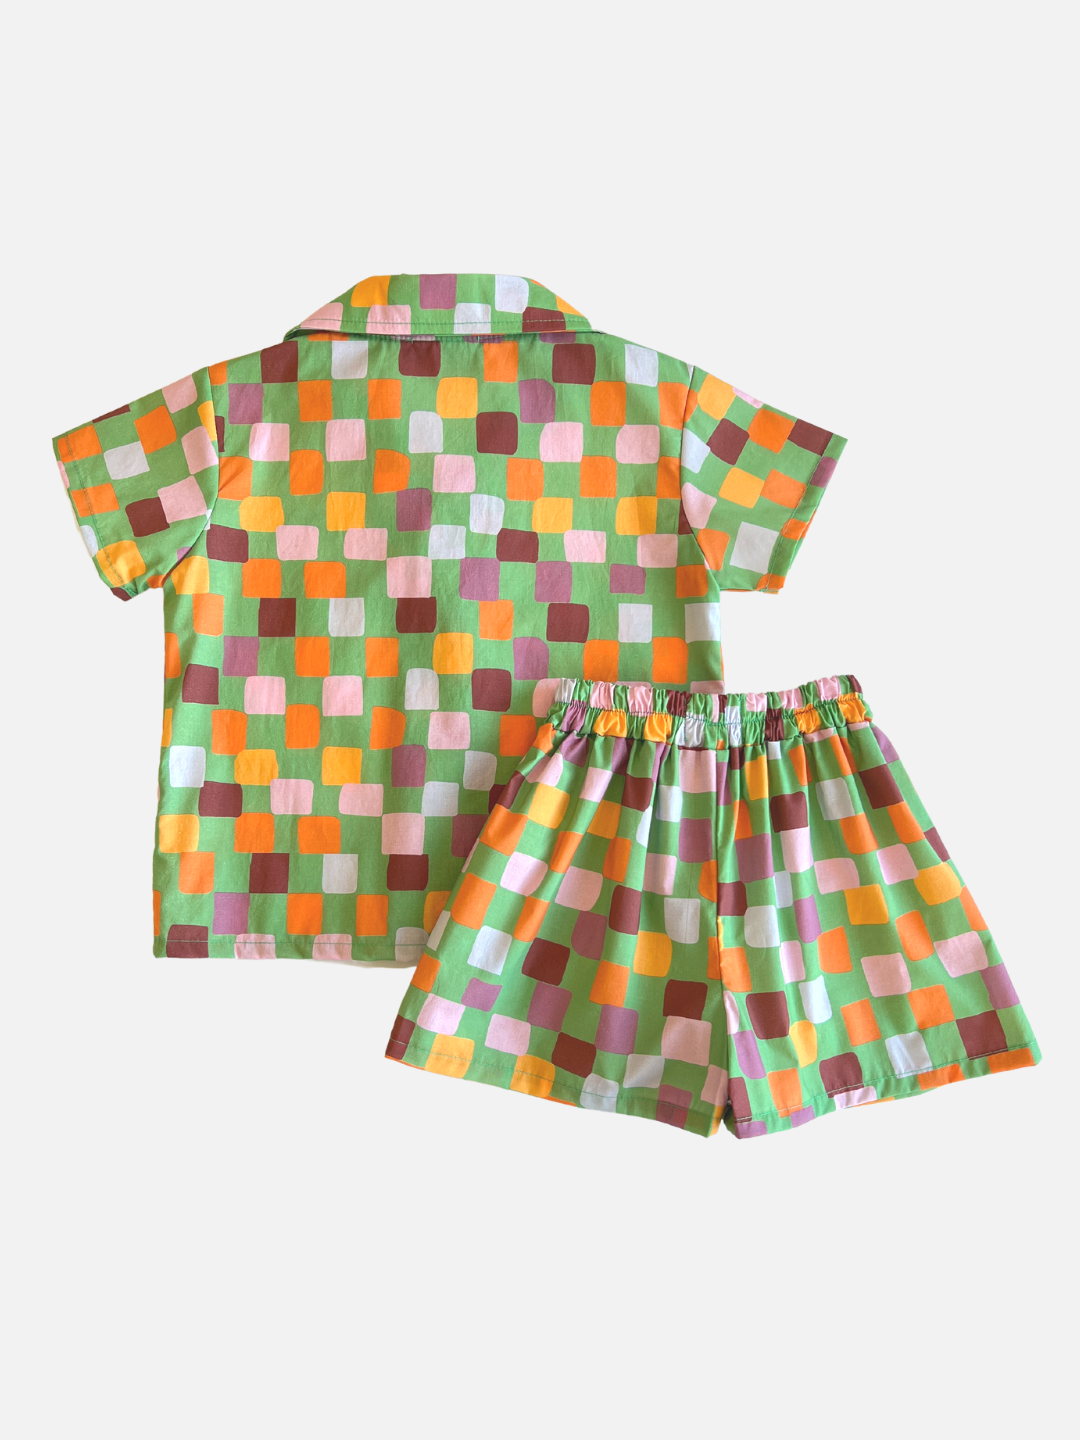 Green | A kids' shirt and shorts set in a pattern of purple, pink, gold and orange squares on a green background, back view